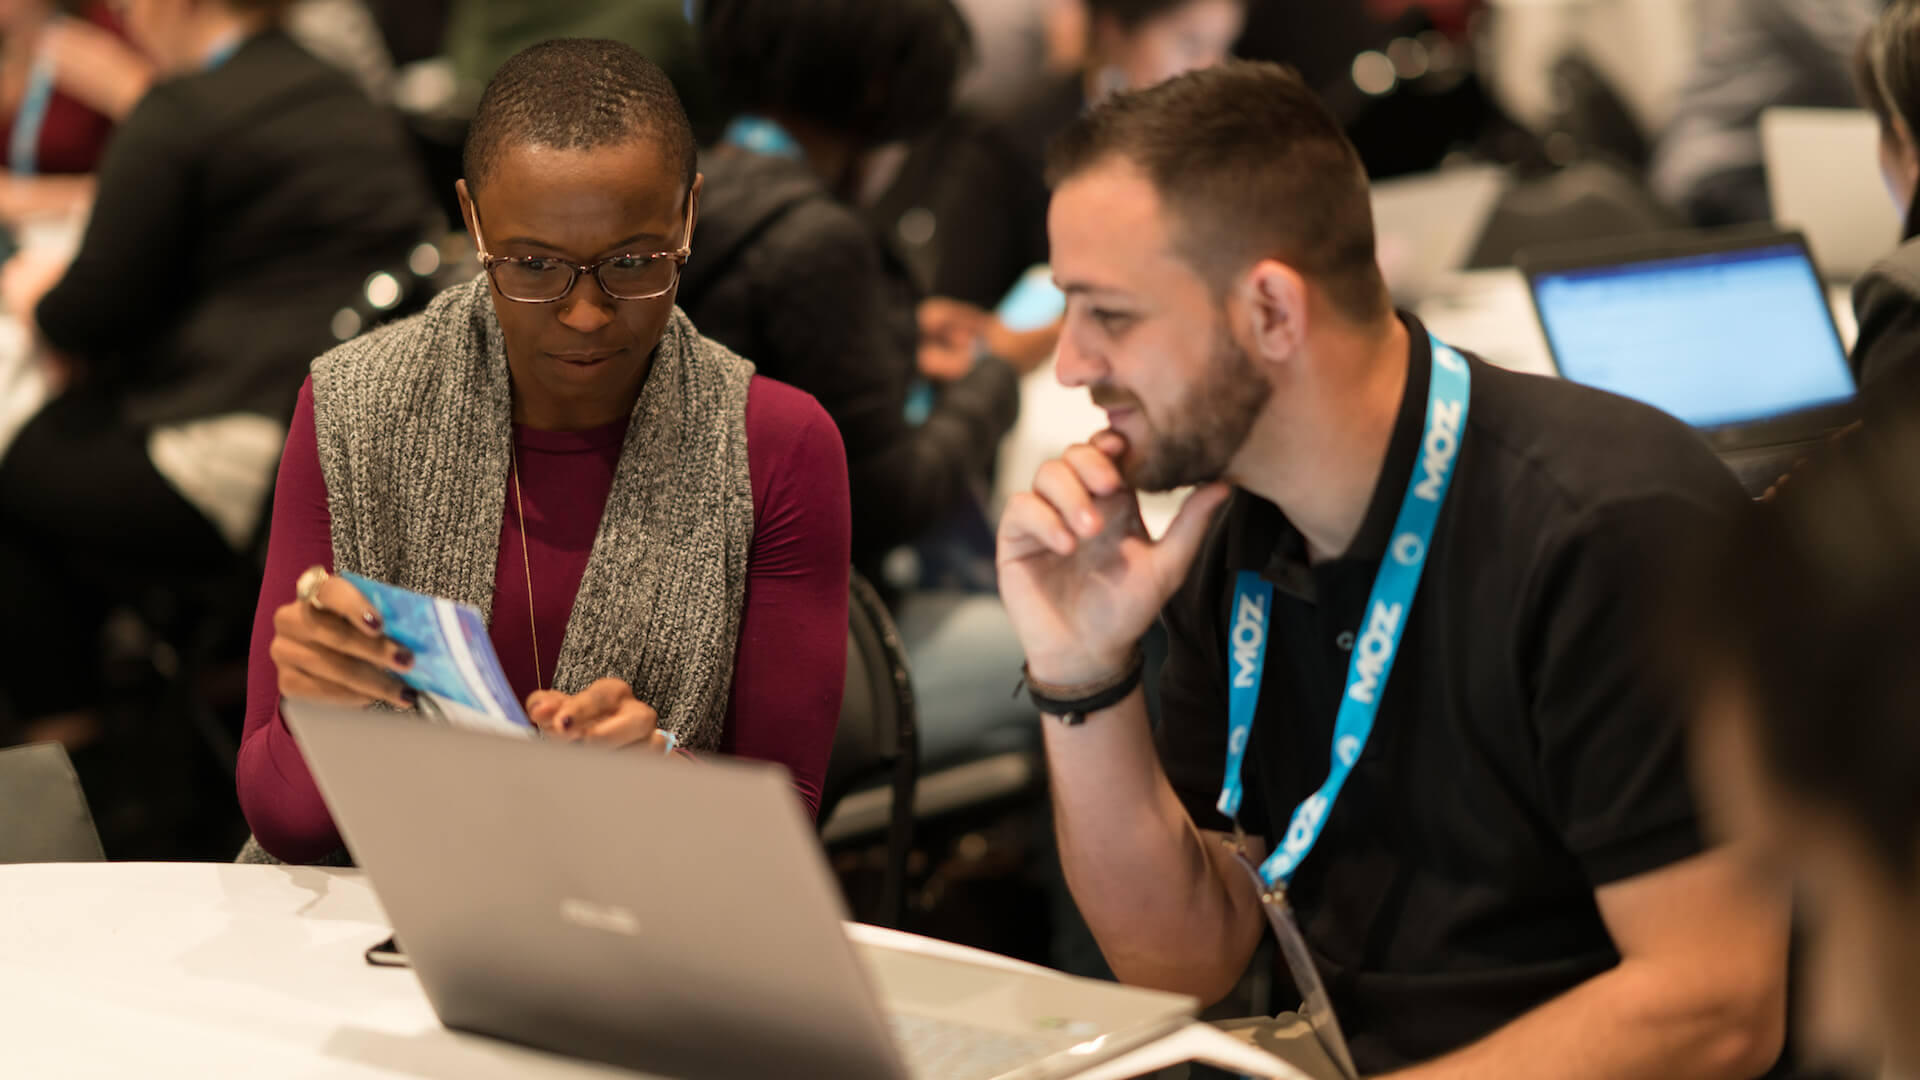 Why should you attend SMX?